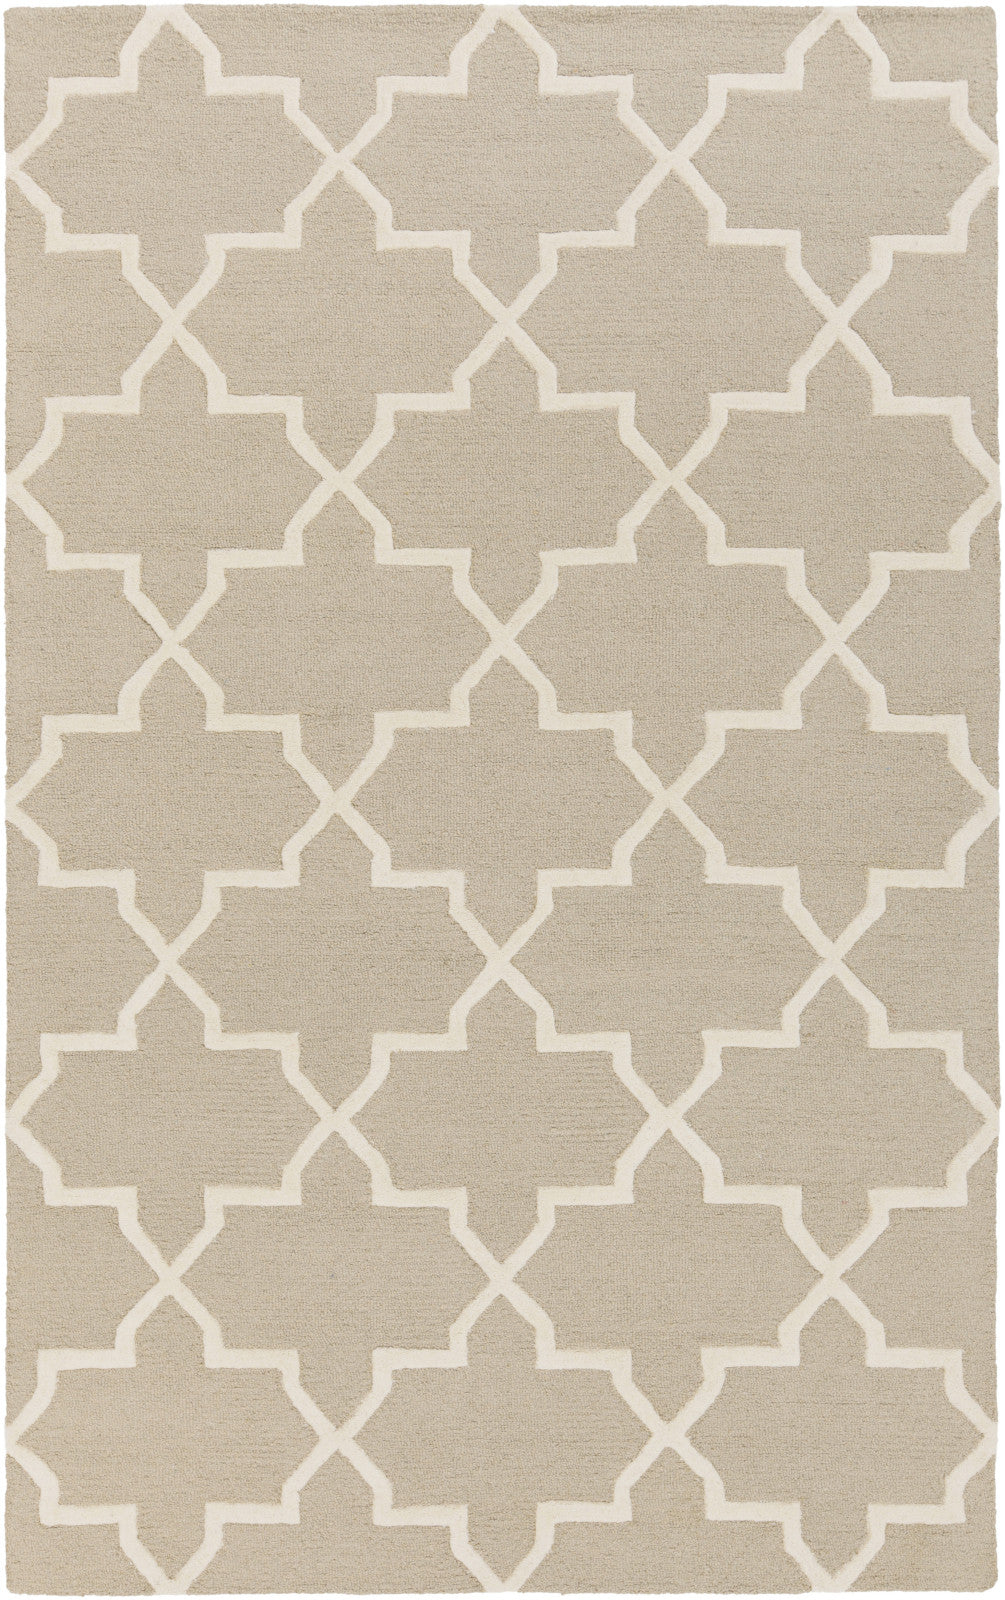 Artistic Weavers Pollack Keely Gray/Ivory Area Rug main image